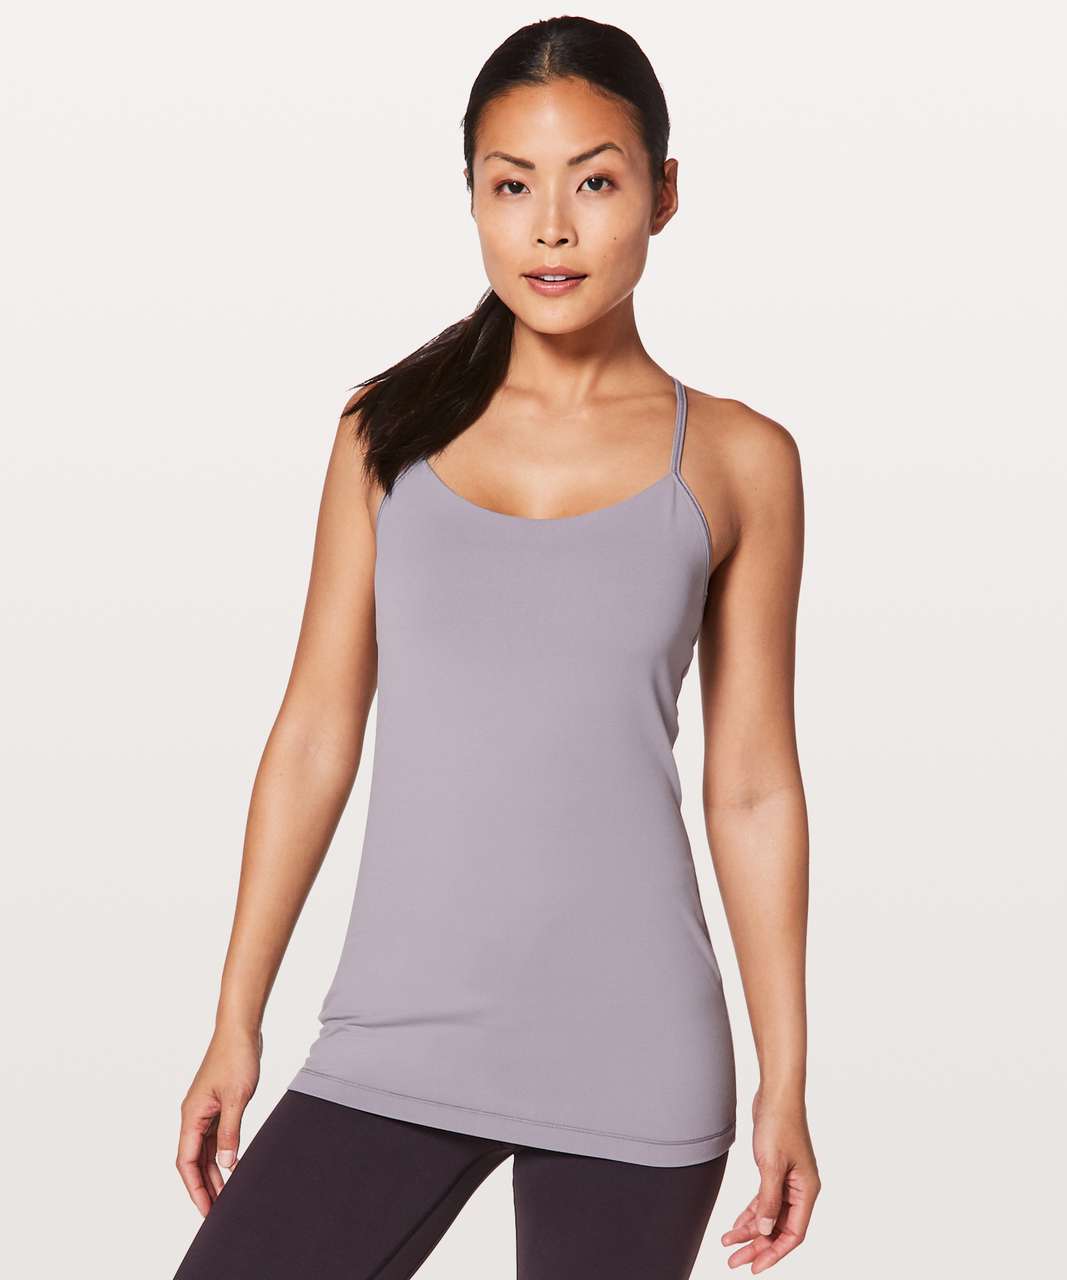 Lululemon Power Pose Tank *Light Support For A/B Cup - Dusty Dawn